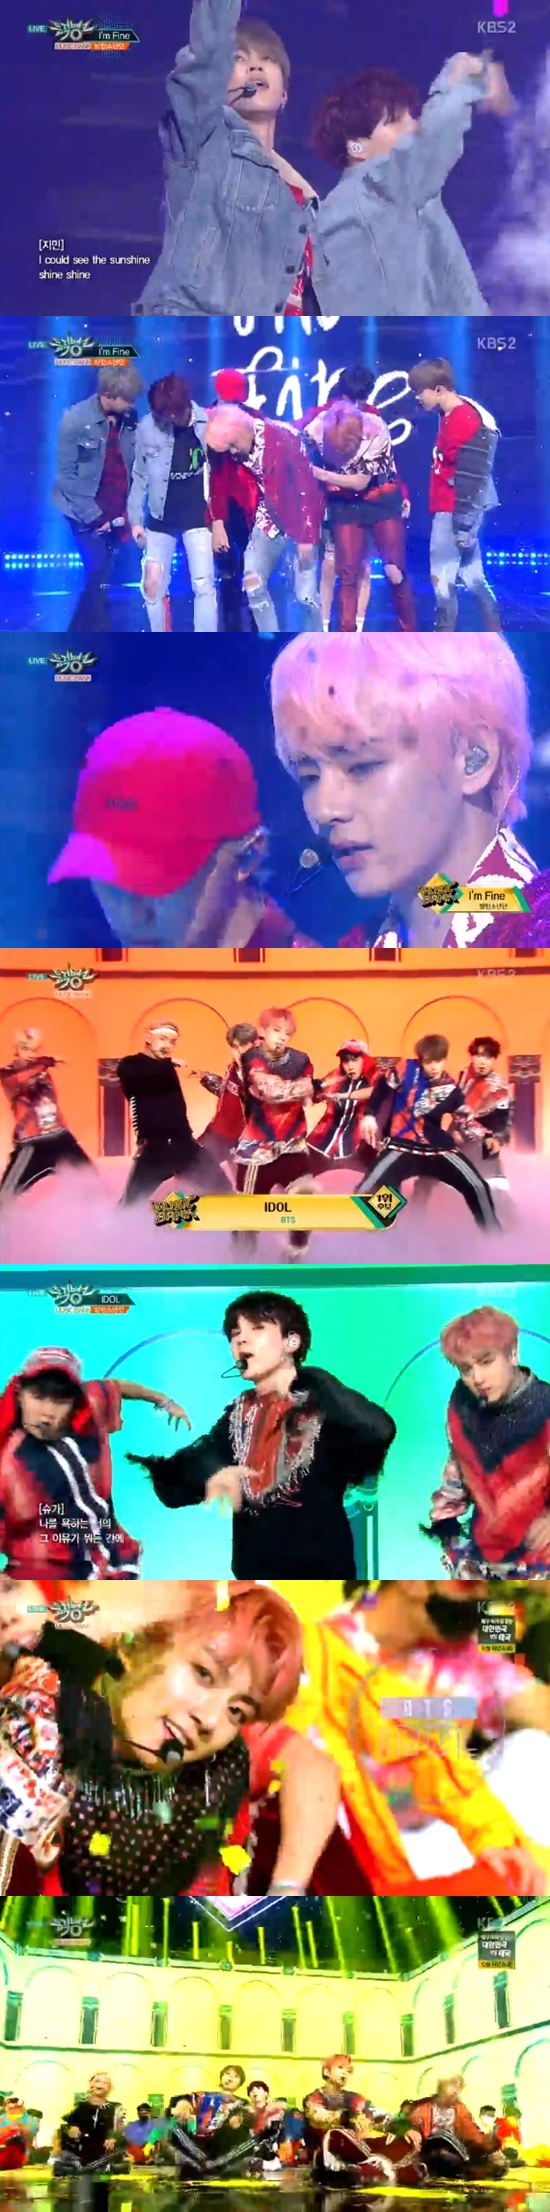 BTS came in first at the same time as the comeback.On KBS 2TV Music Bank broadcast on the 31st, BTS Idol beat Red Velvets Power Up and took first place at the same time as the comeback, and announced the Idol craze.Were getting the prize in the first week of the comeback, not just our own, but the prize youve created, BTS said.Thank you for this award, Ami, I think you are the only one, said Bu.As mentioned earlier, BTS took the Samulnori instrument and took the stage to celebrate the first place with a wind.On this day, there was a comeback stage of Shinhwa, which celebrated its 20th anniversary.Shinhwa announced the return of the legend by showing off the charisma of a different history with KISS ME LIKE THAT and Do not leave.The title song Kiss My Rike That is a dance song led by acoustic guitar. It is an addictive chorus that catches the ear. Shinhwa has an attractive voice and sensual performance.The group BTS, which rocked the world, also made a comeback: The Bulletproof Boys, who released two new songs, Idol (IDOL) and Im Fine, took control of the stage with the charisma of bulletproof.Especially, Idol is a combination of Korean traditional music and Chuimsae in South Afrikaan beat, and completed sophisticated music that only BTS can show.The soft-toned Raina gave a faint sensibility by making a comeback with Small in the middle, and NCT DREAM gave a powerful energy by releasing the first two stages of We Go Up and 1, 2, 3.In addition, (girl) children, IN2IT, MXM, SF9, Stray Kids, Go Sung-min, Kim Yong-guk, Nature (NATURE), Norazo, LaBoom (LABOUM), Lime Soda, Rossi, Berrygut, Big Flo, Hot-blooded Nama (Tajihyuk), Impact appeared and set up various stages.Photo = KBS 2TV broadcast screen